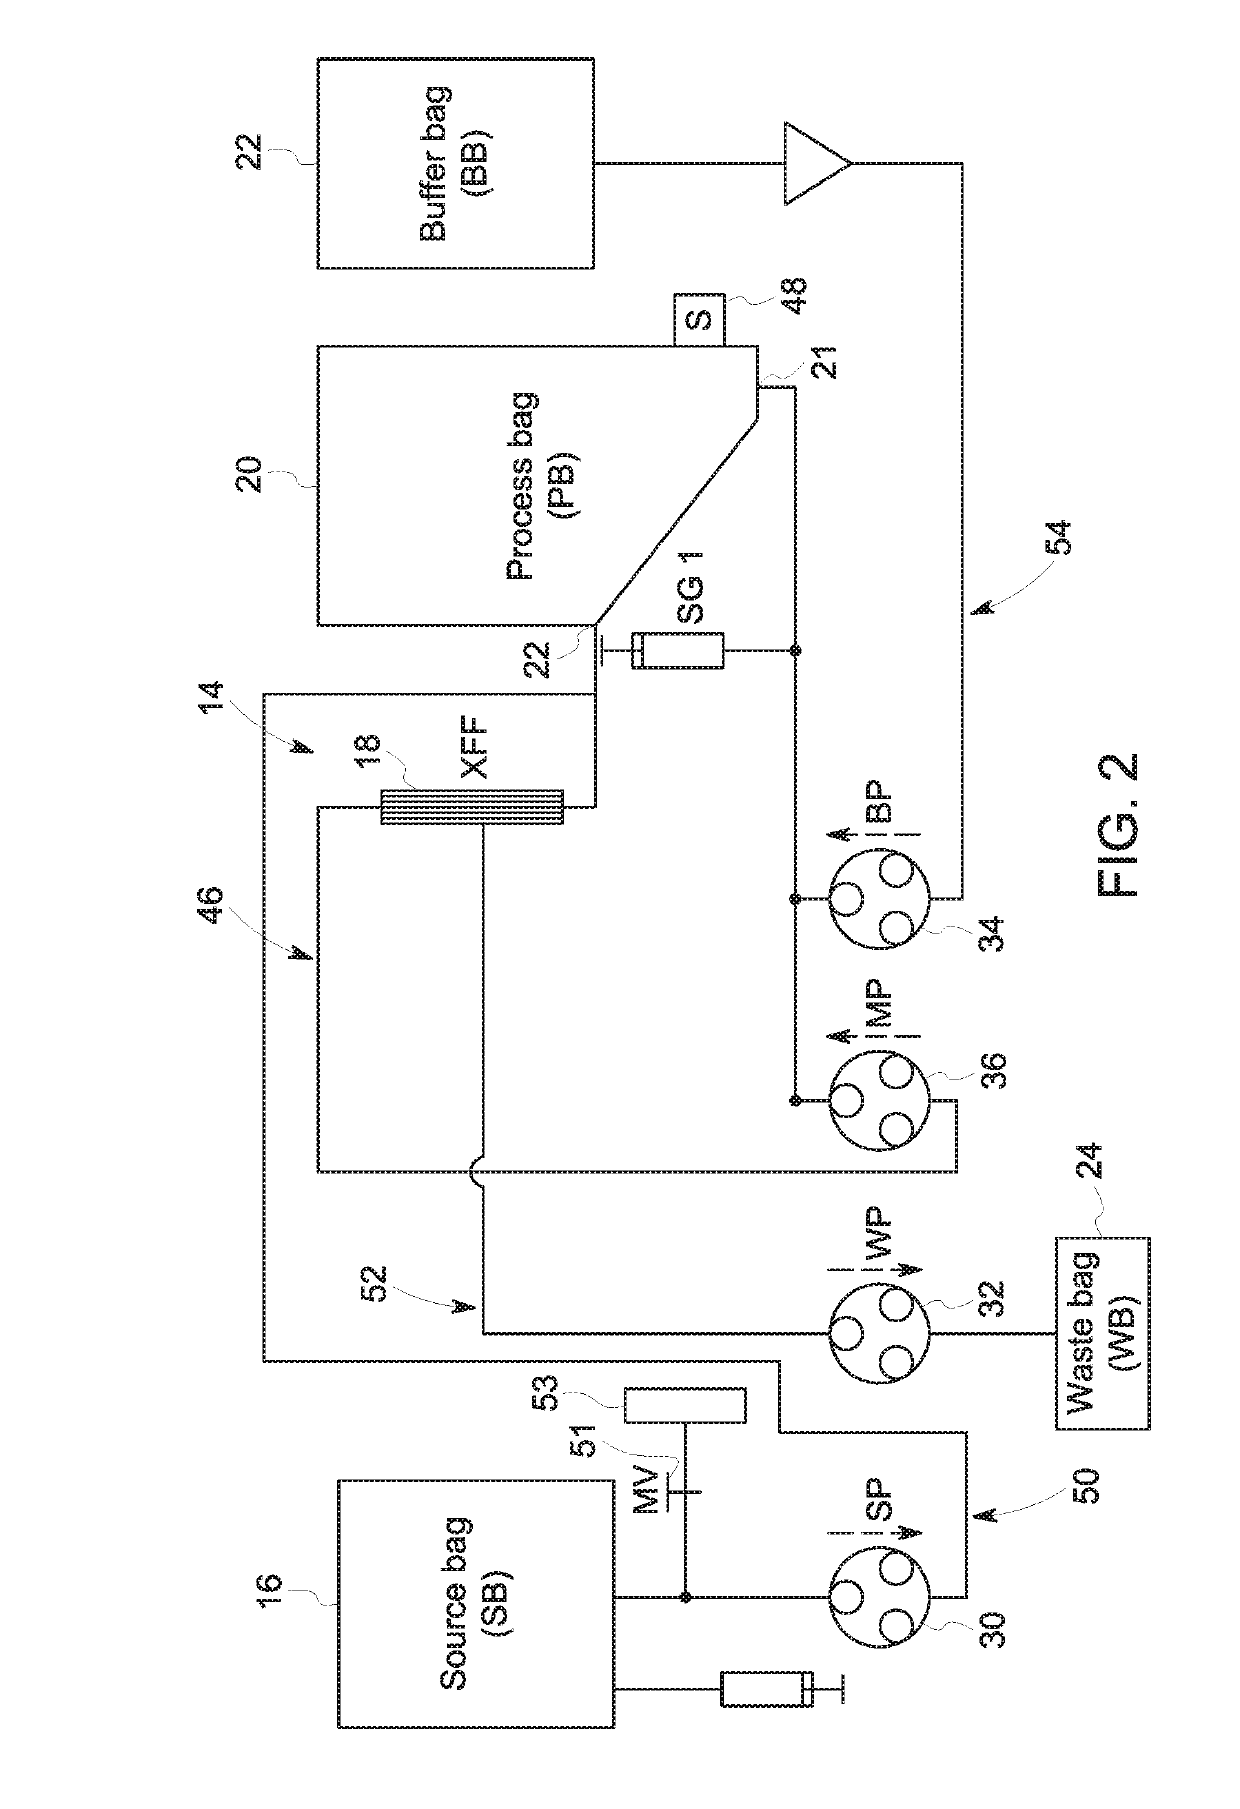 Systems and methods for utilizing crossflow filtration for cell enrichment